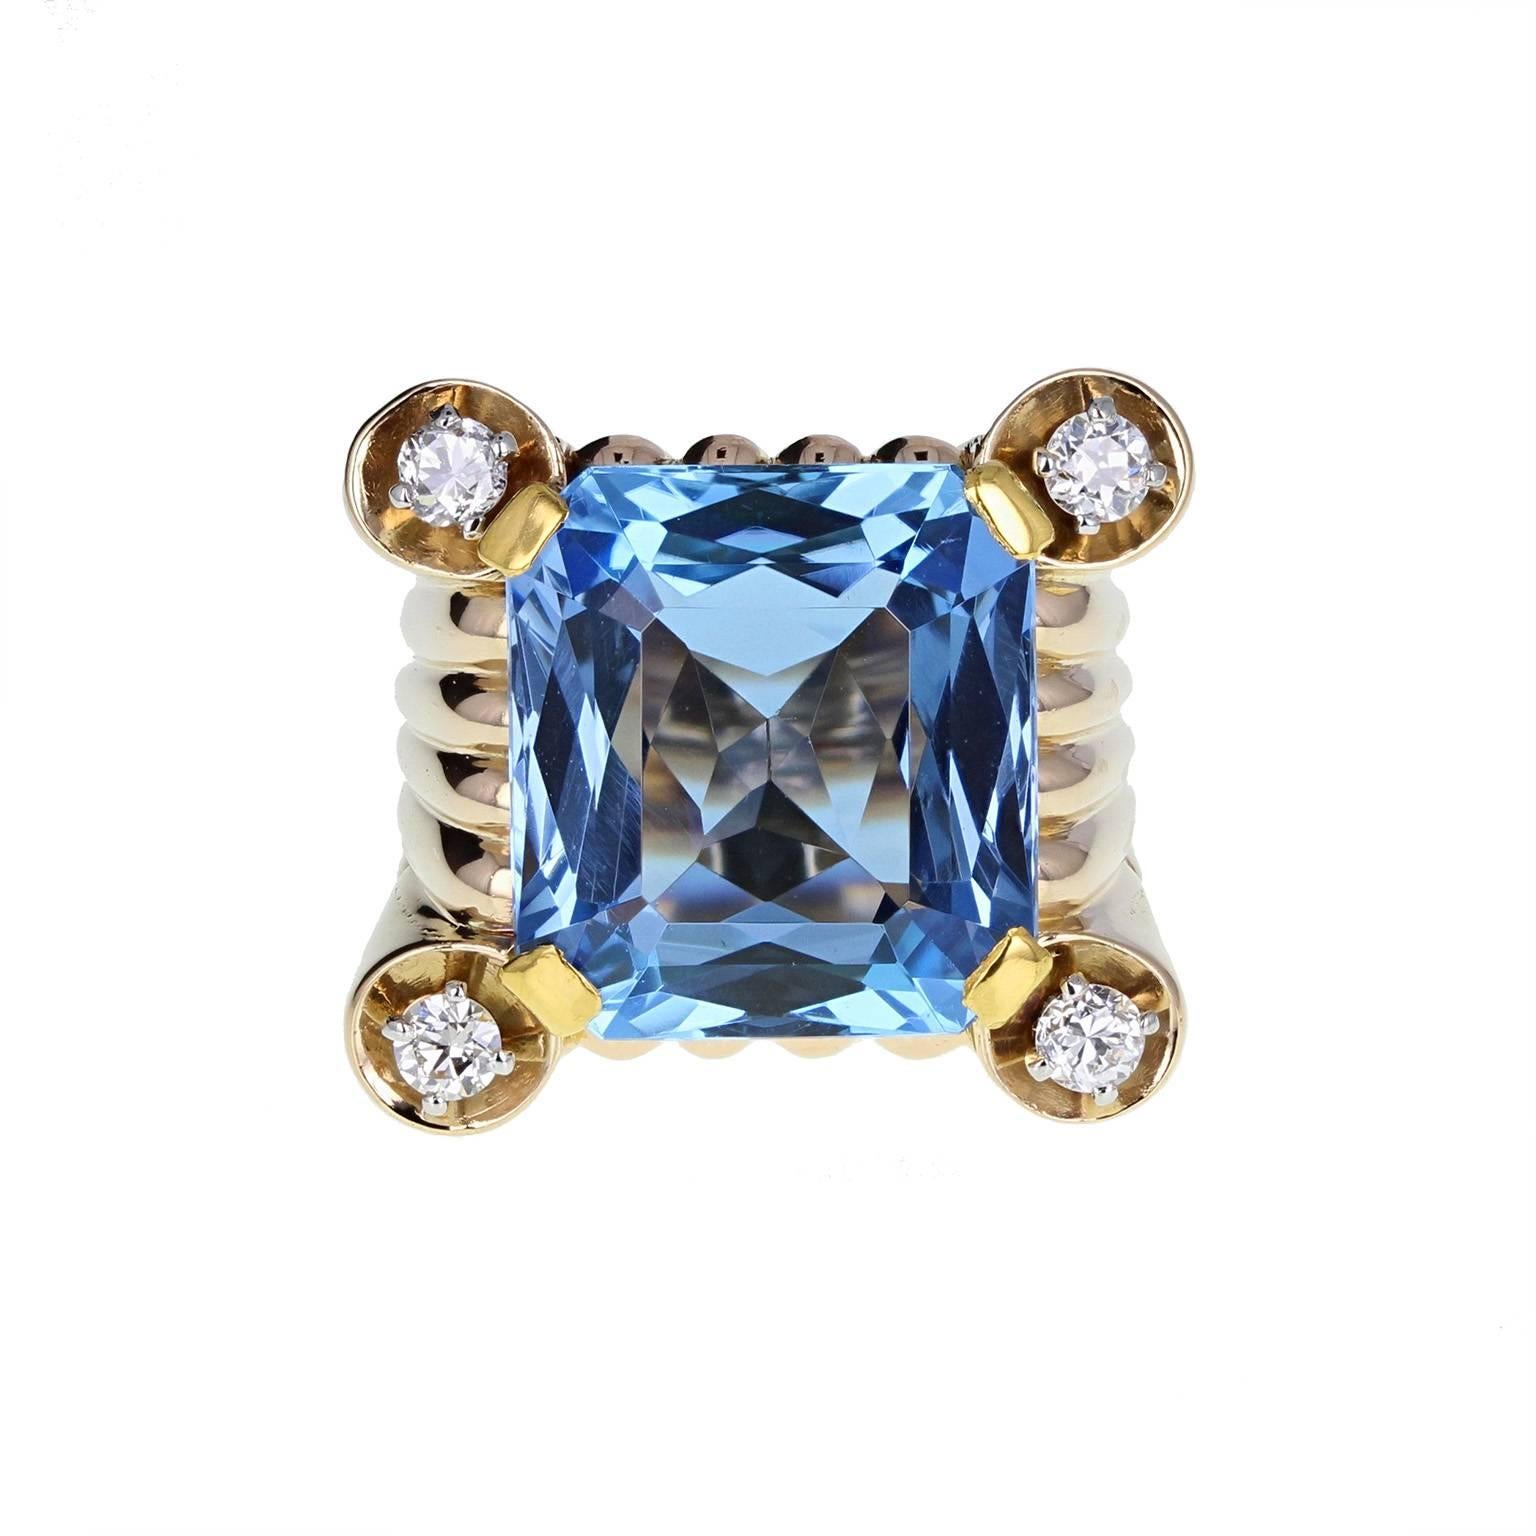 A bold, brave and fine quality cocktail ring from the 1940s. The square, reeded setting mounted with a square radiant-cut aquamarine of astonishing colour. A single brilliant-cut diamond at each corner. The tapering shank is reeded, blending